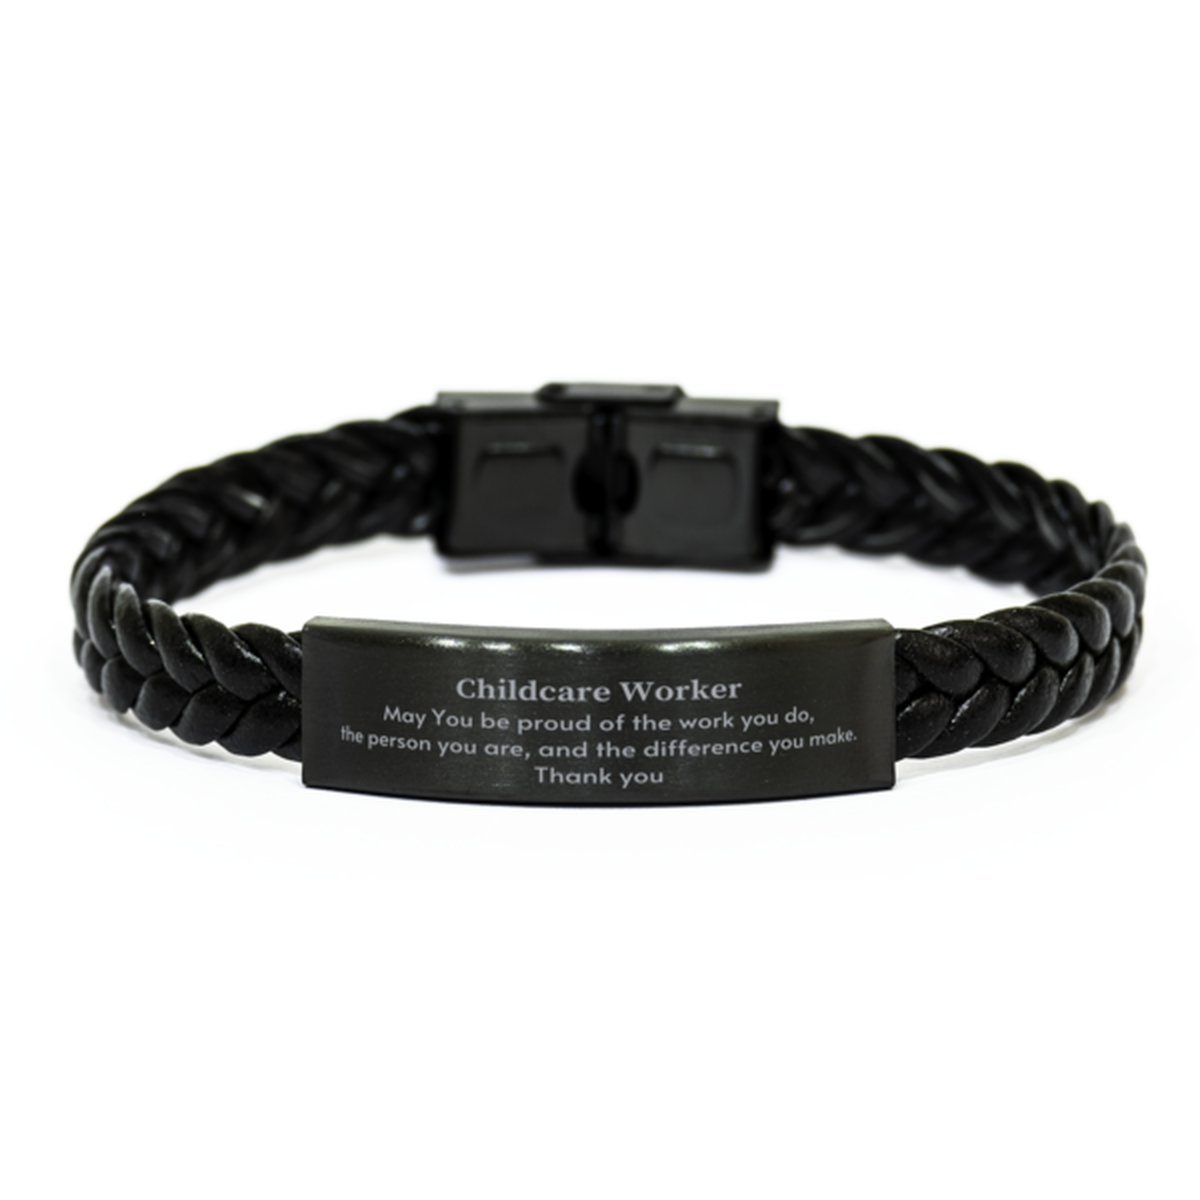 Heartwarming Braided Leather Bracelet Retirement Coworkers Gifts for Childcare Worker, Childcare Worker May You be proud of the work you do, the person you are Gifts for Boss Men Women Friends